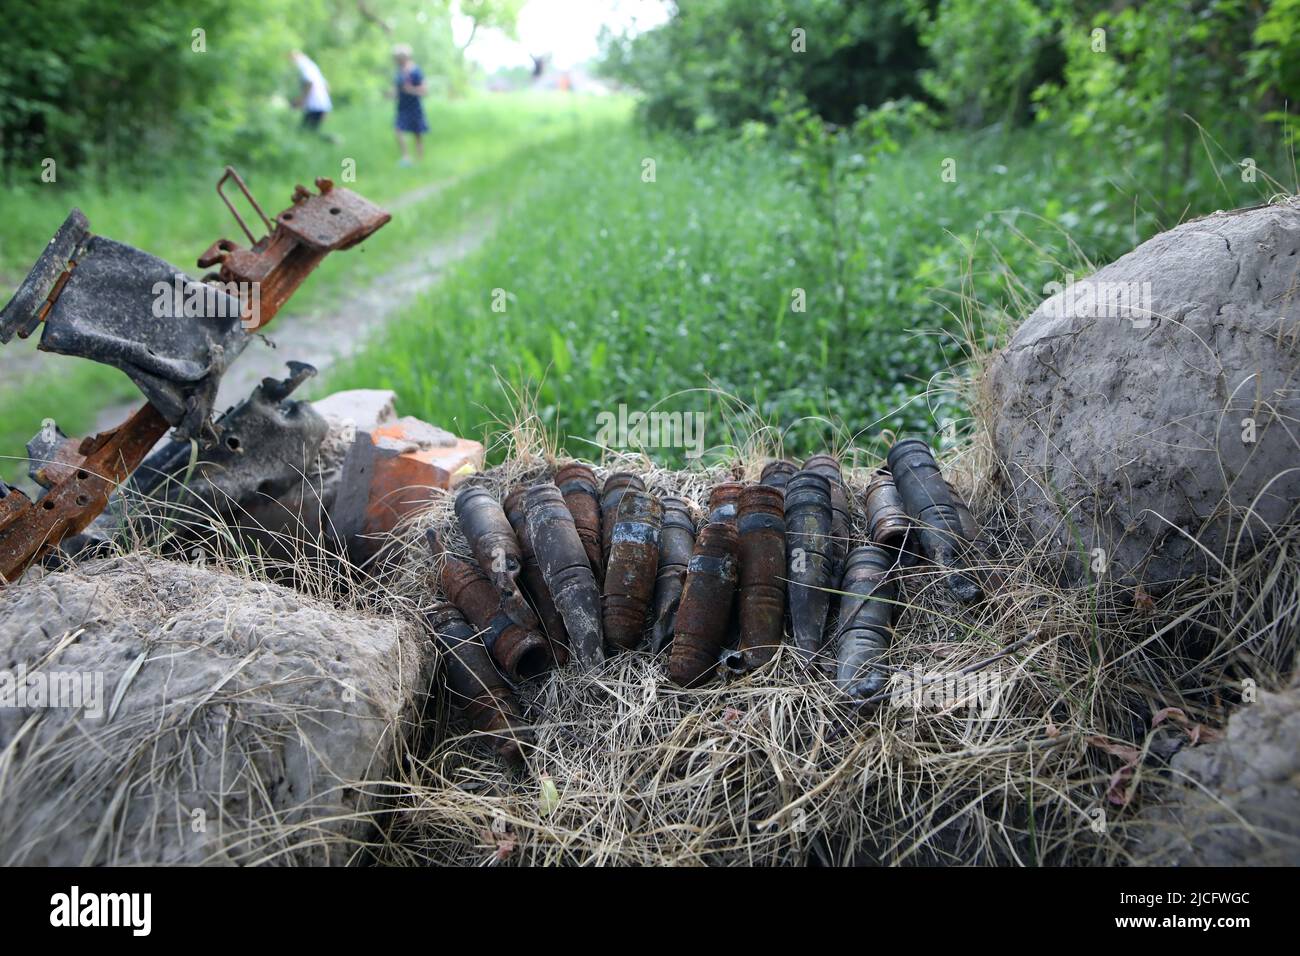 KYIV REGION, UKRAINE - JUNE 4, 2022 - The remains of Russian military vehicles and ammunition are pictured on the outskirts of Vovchkiv village where Stock Photo